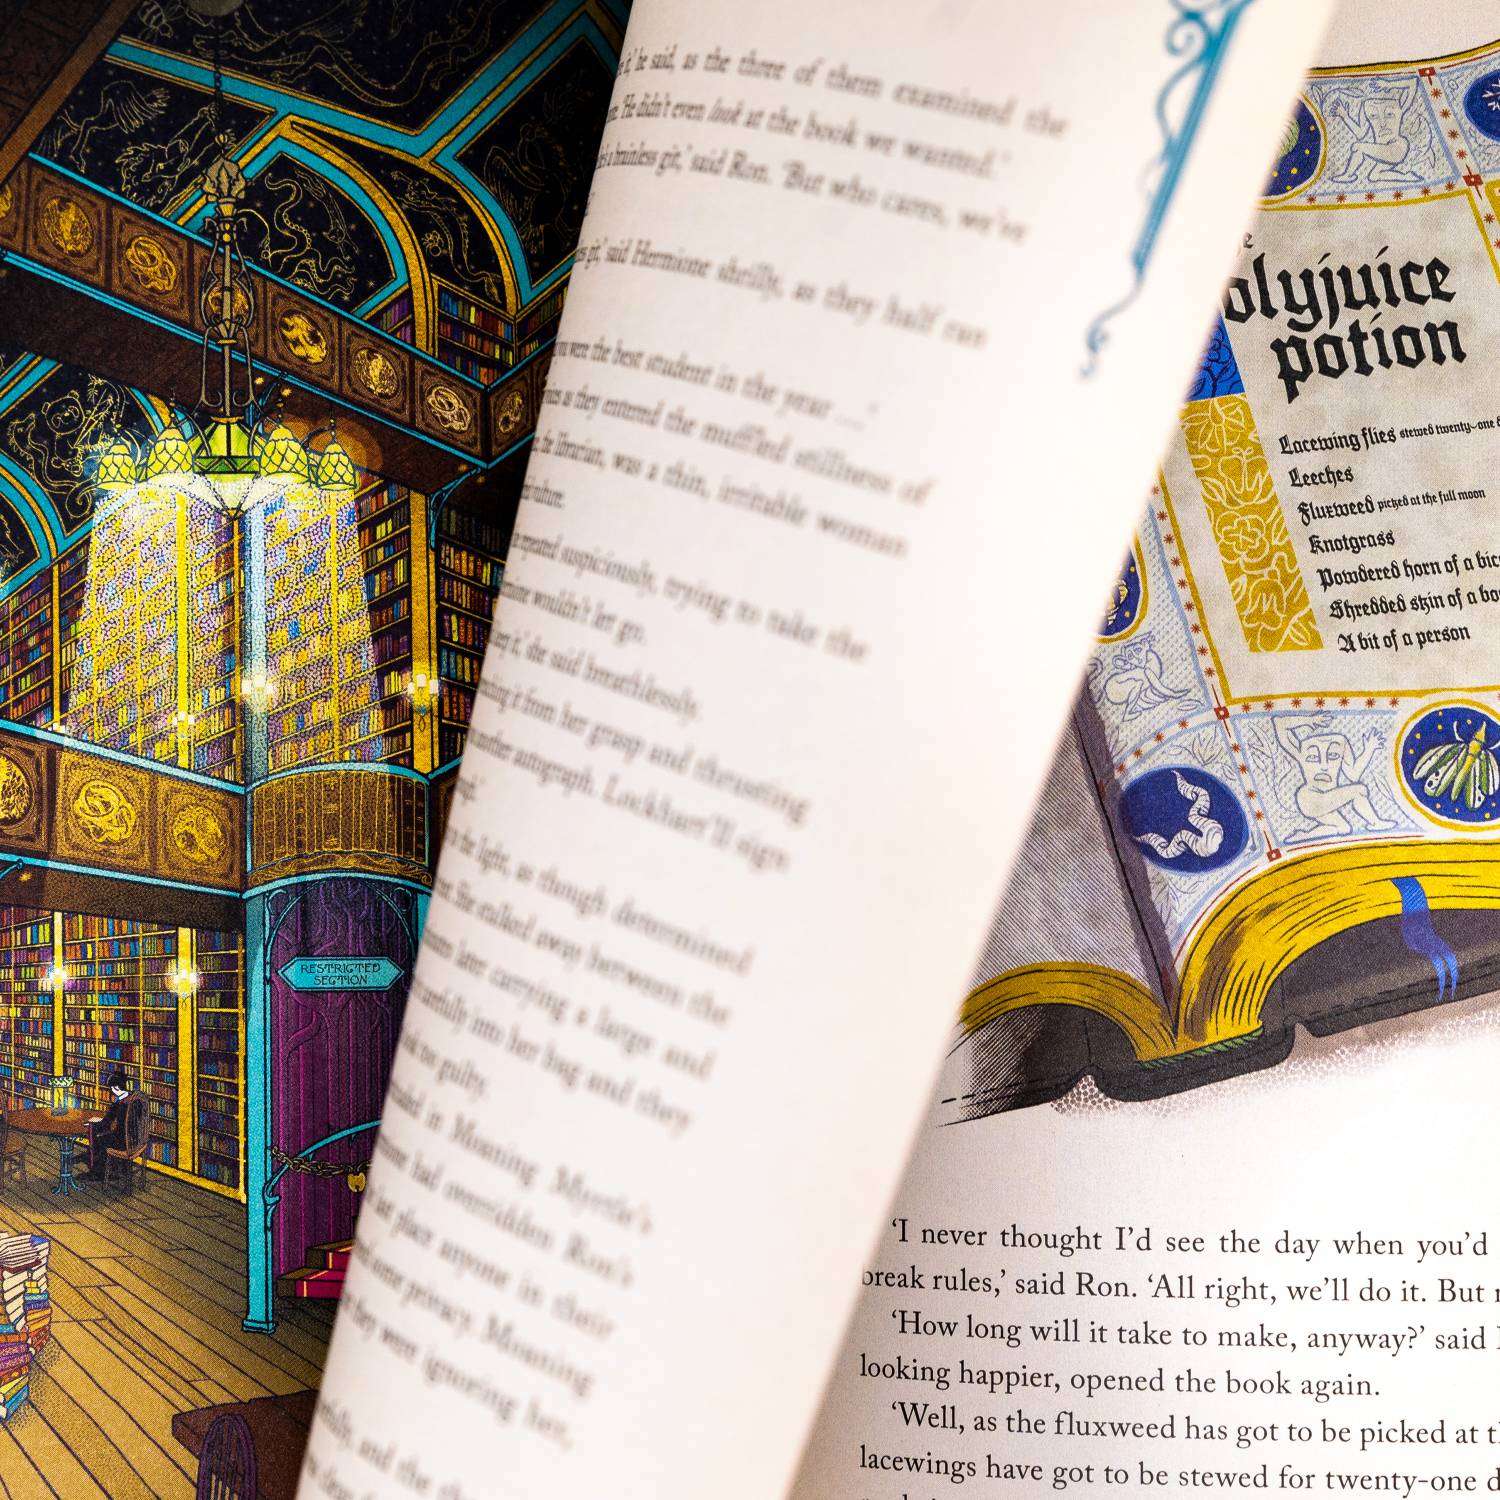 Harry Potter 2 and the Chamber of Secrets MinaLima 